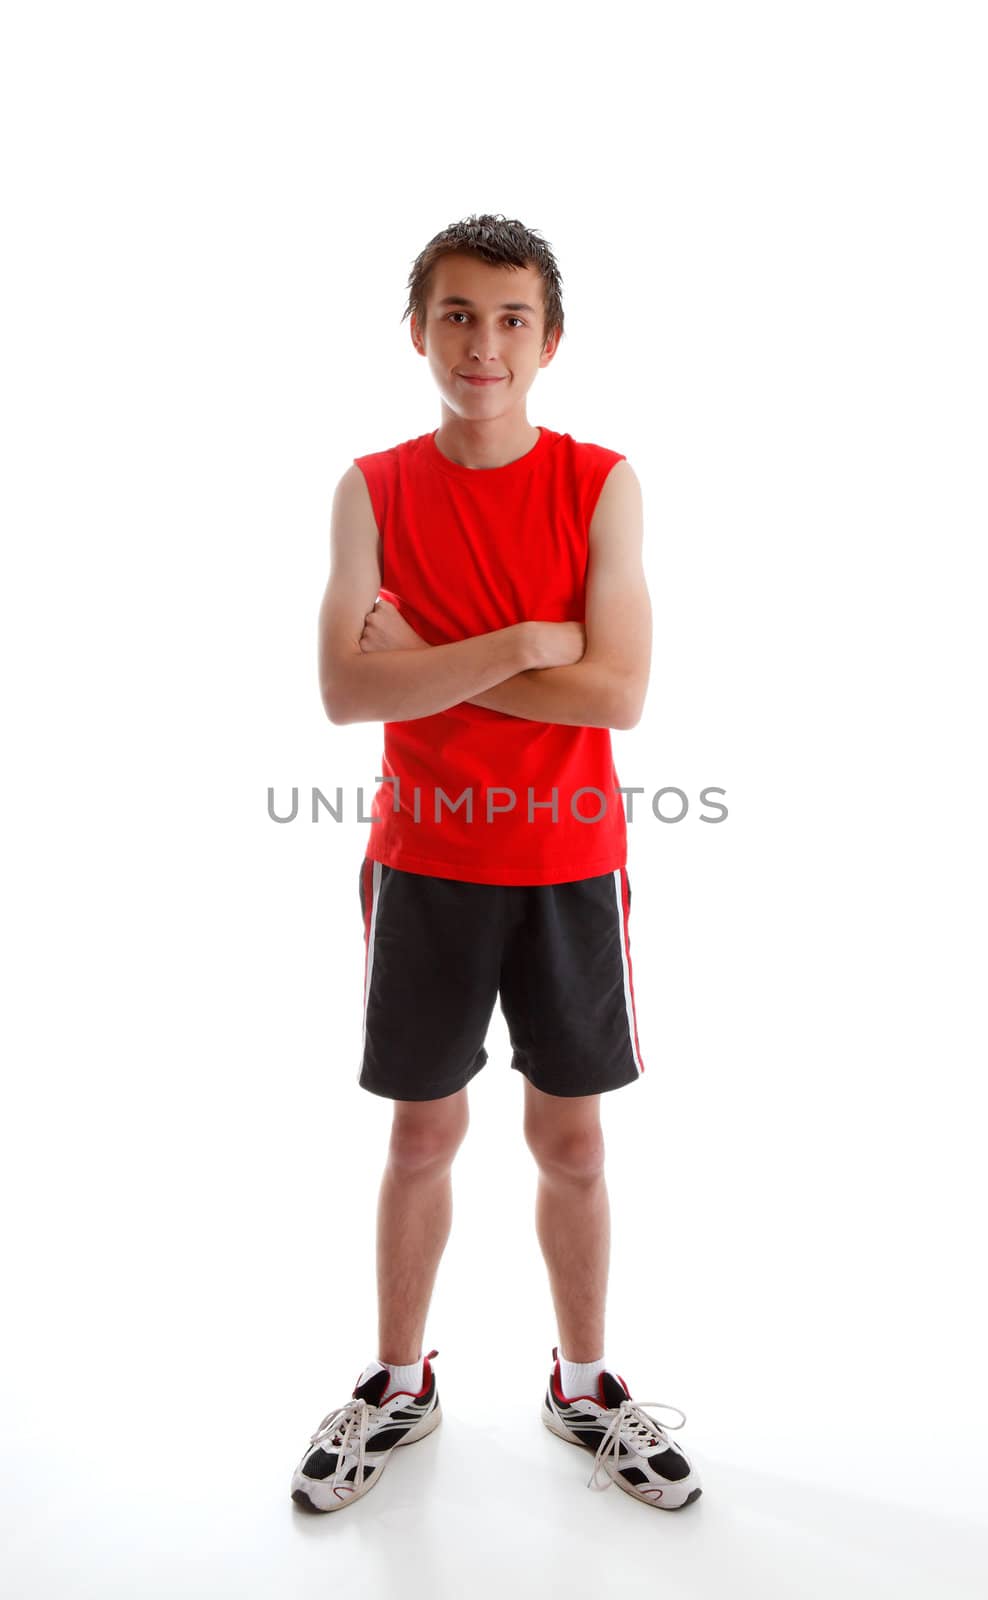 A young boy teenager wearing sports wear clothing, tank top, shorts and  sports shoes and standing with arms crossed.  White background.